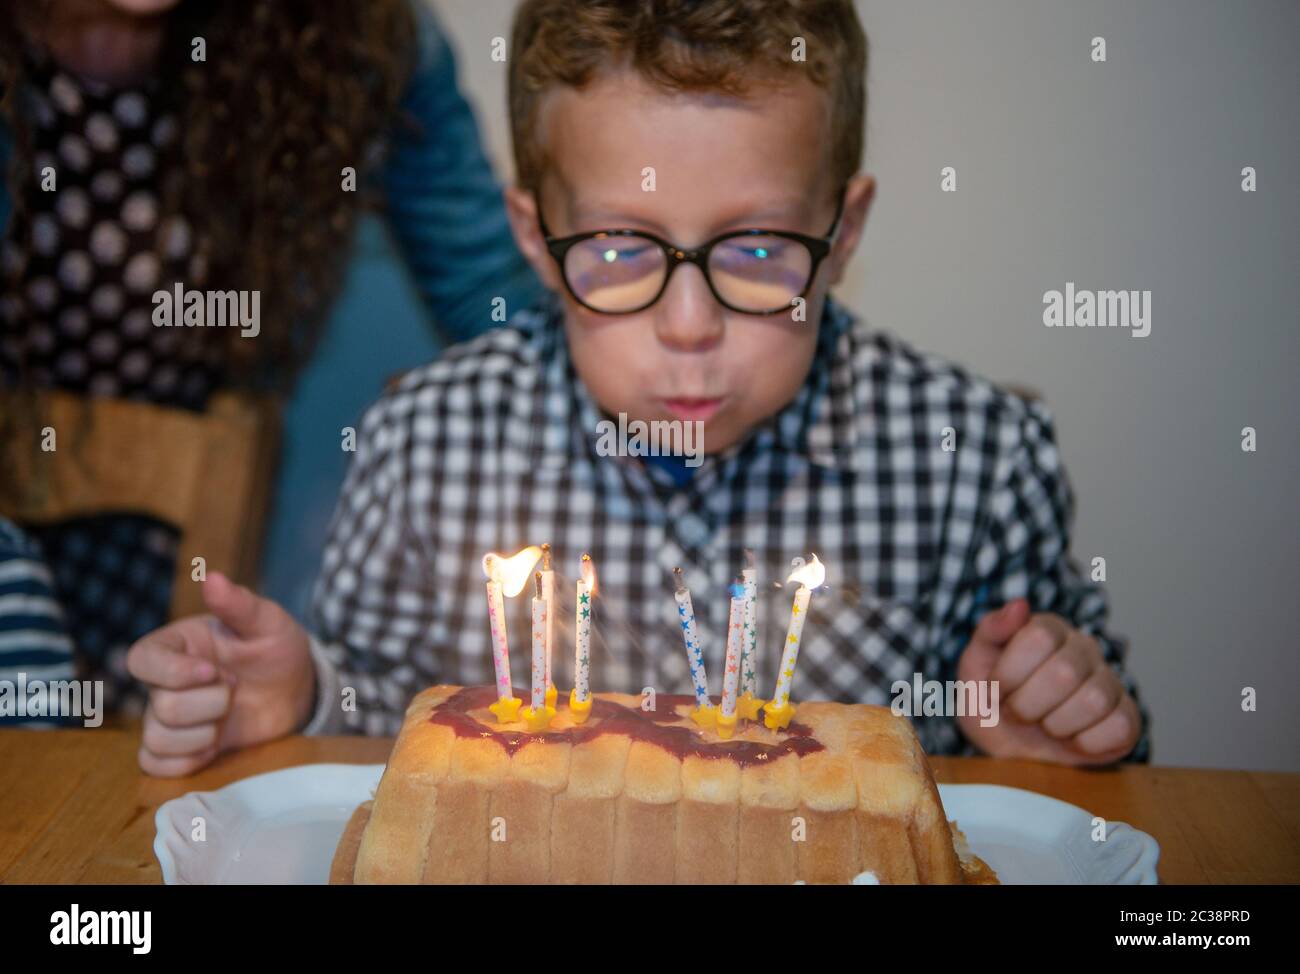 a little boy blowing candles on cake, happy birthday party Stock Photo